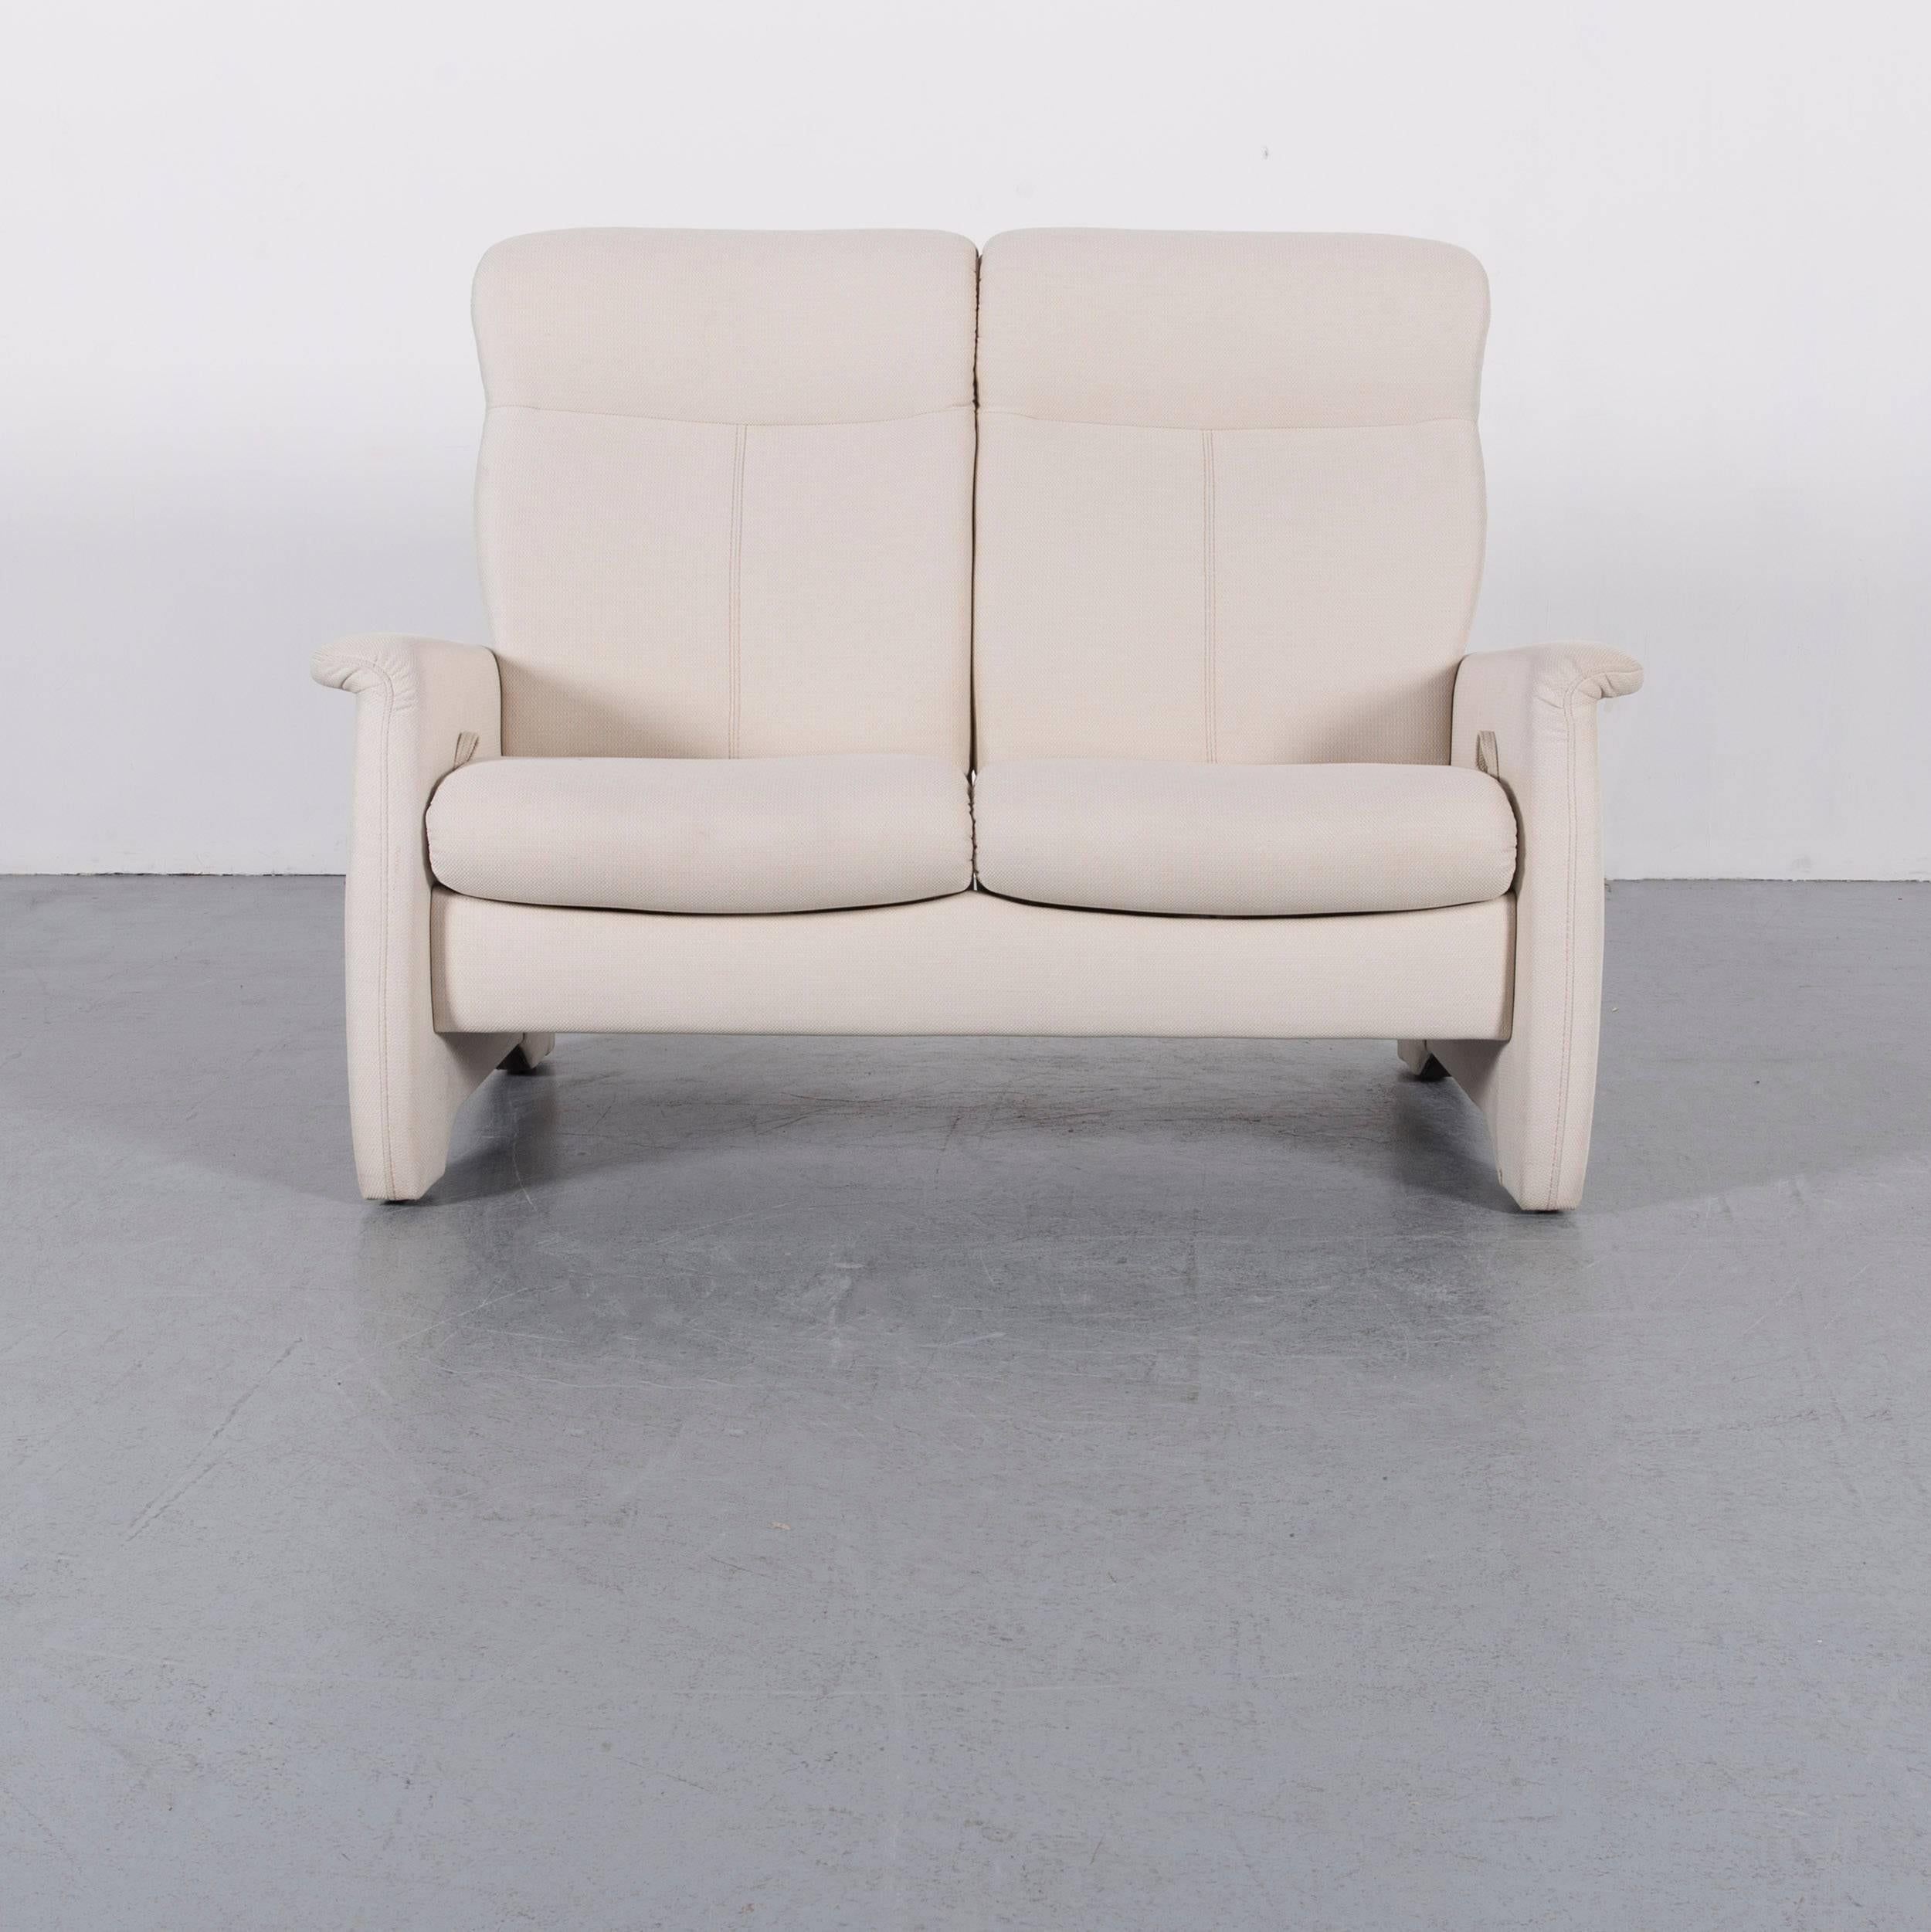 We bring to you an Himolla fabric sofa set off-white two-seat foot-stool.
































